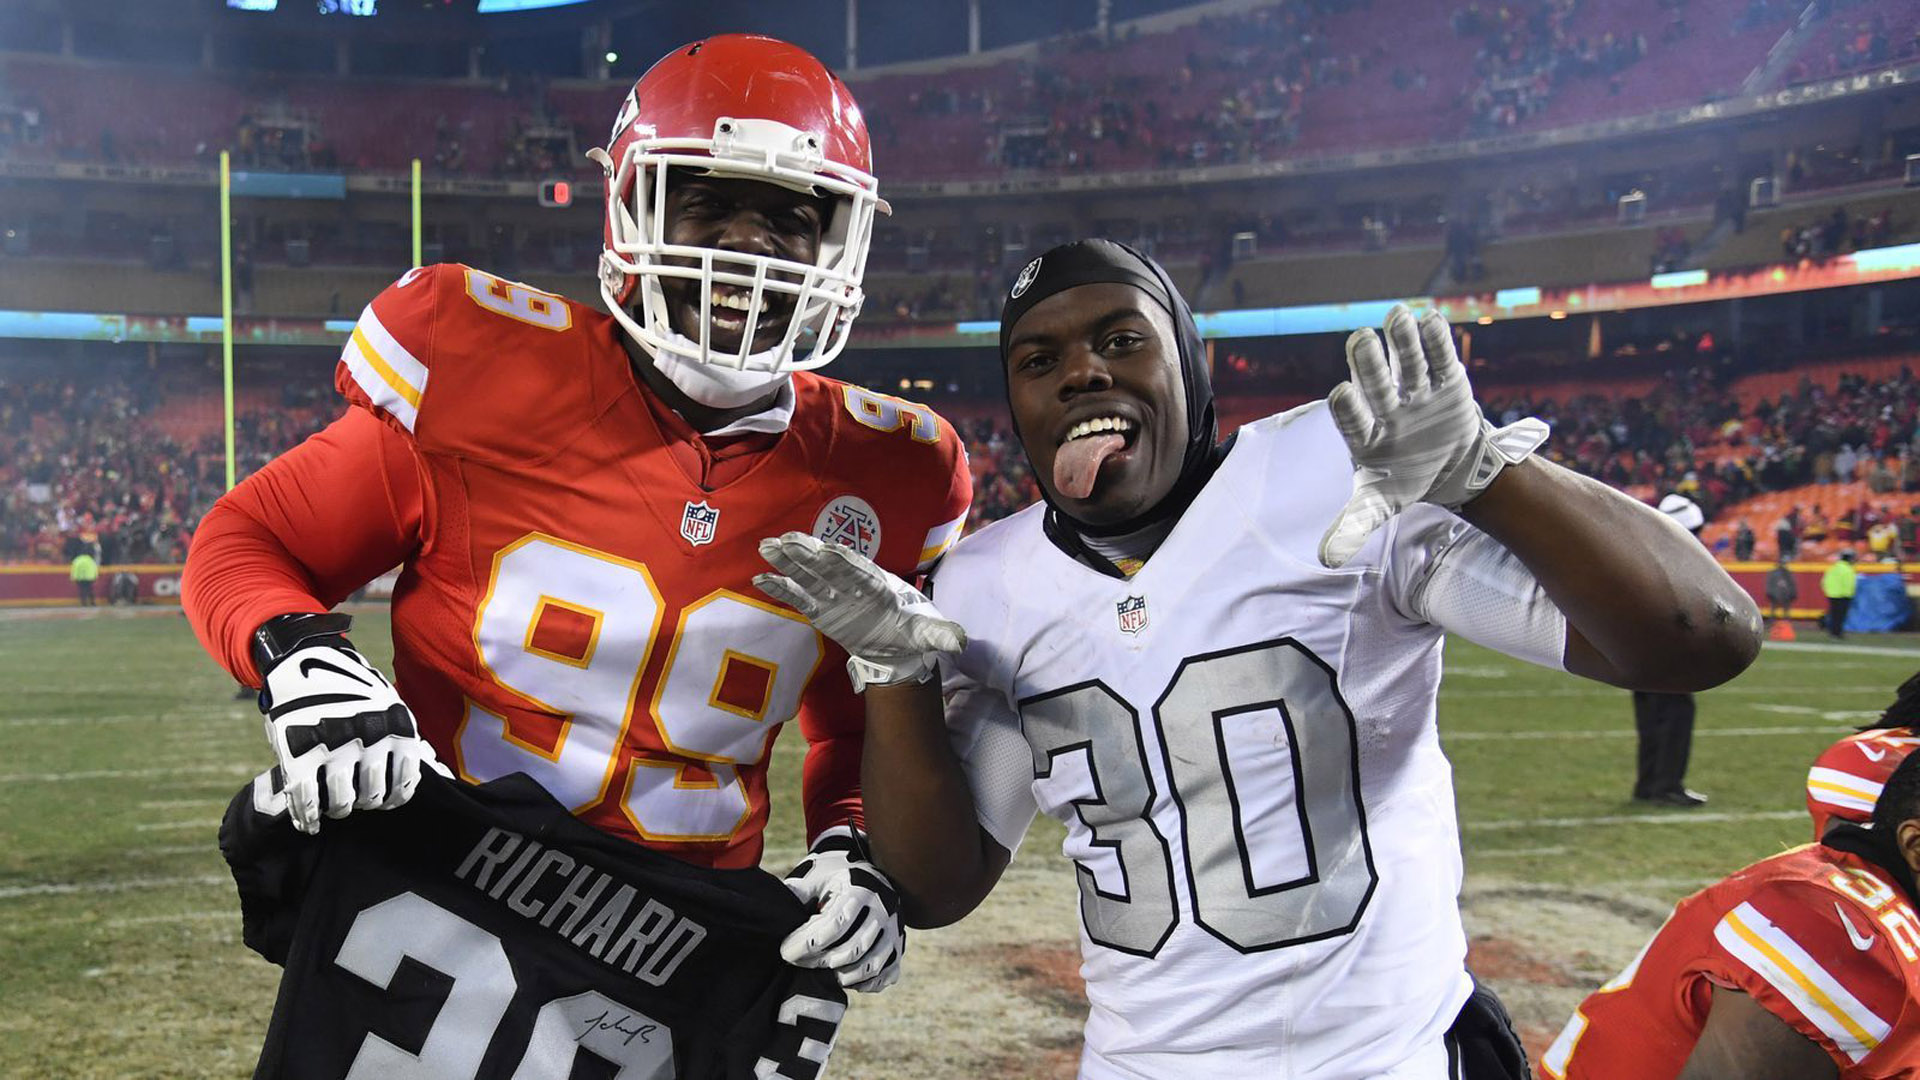 Tyreek Hill Is Posing For A Photo With Another Player HD Tyreek Hill